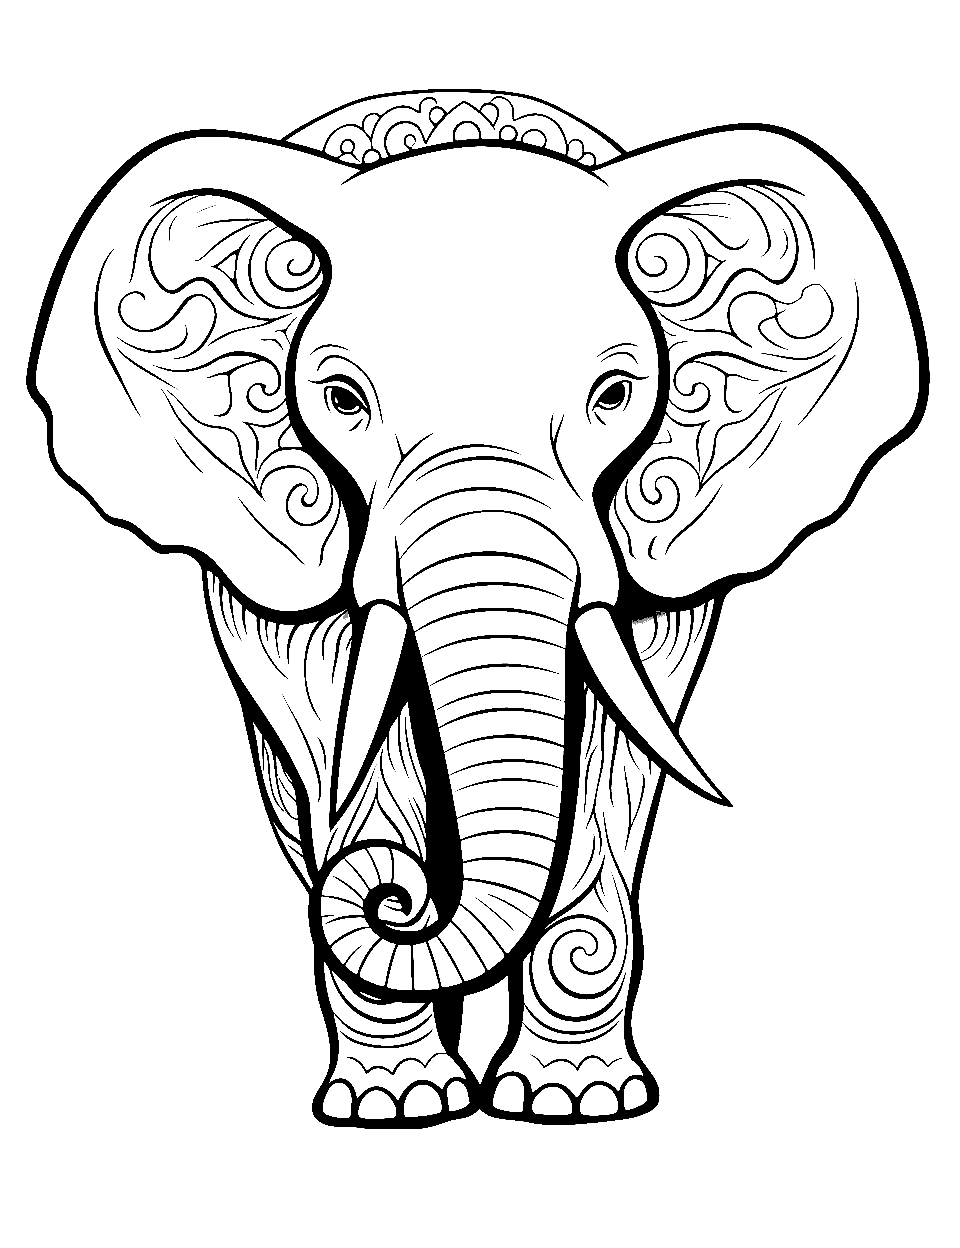 Elephant Scene Coloring Page - A scene showing an elephant’s profile with intricate patterns.